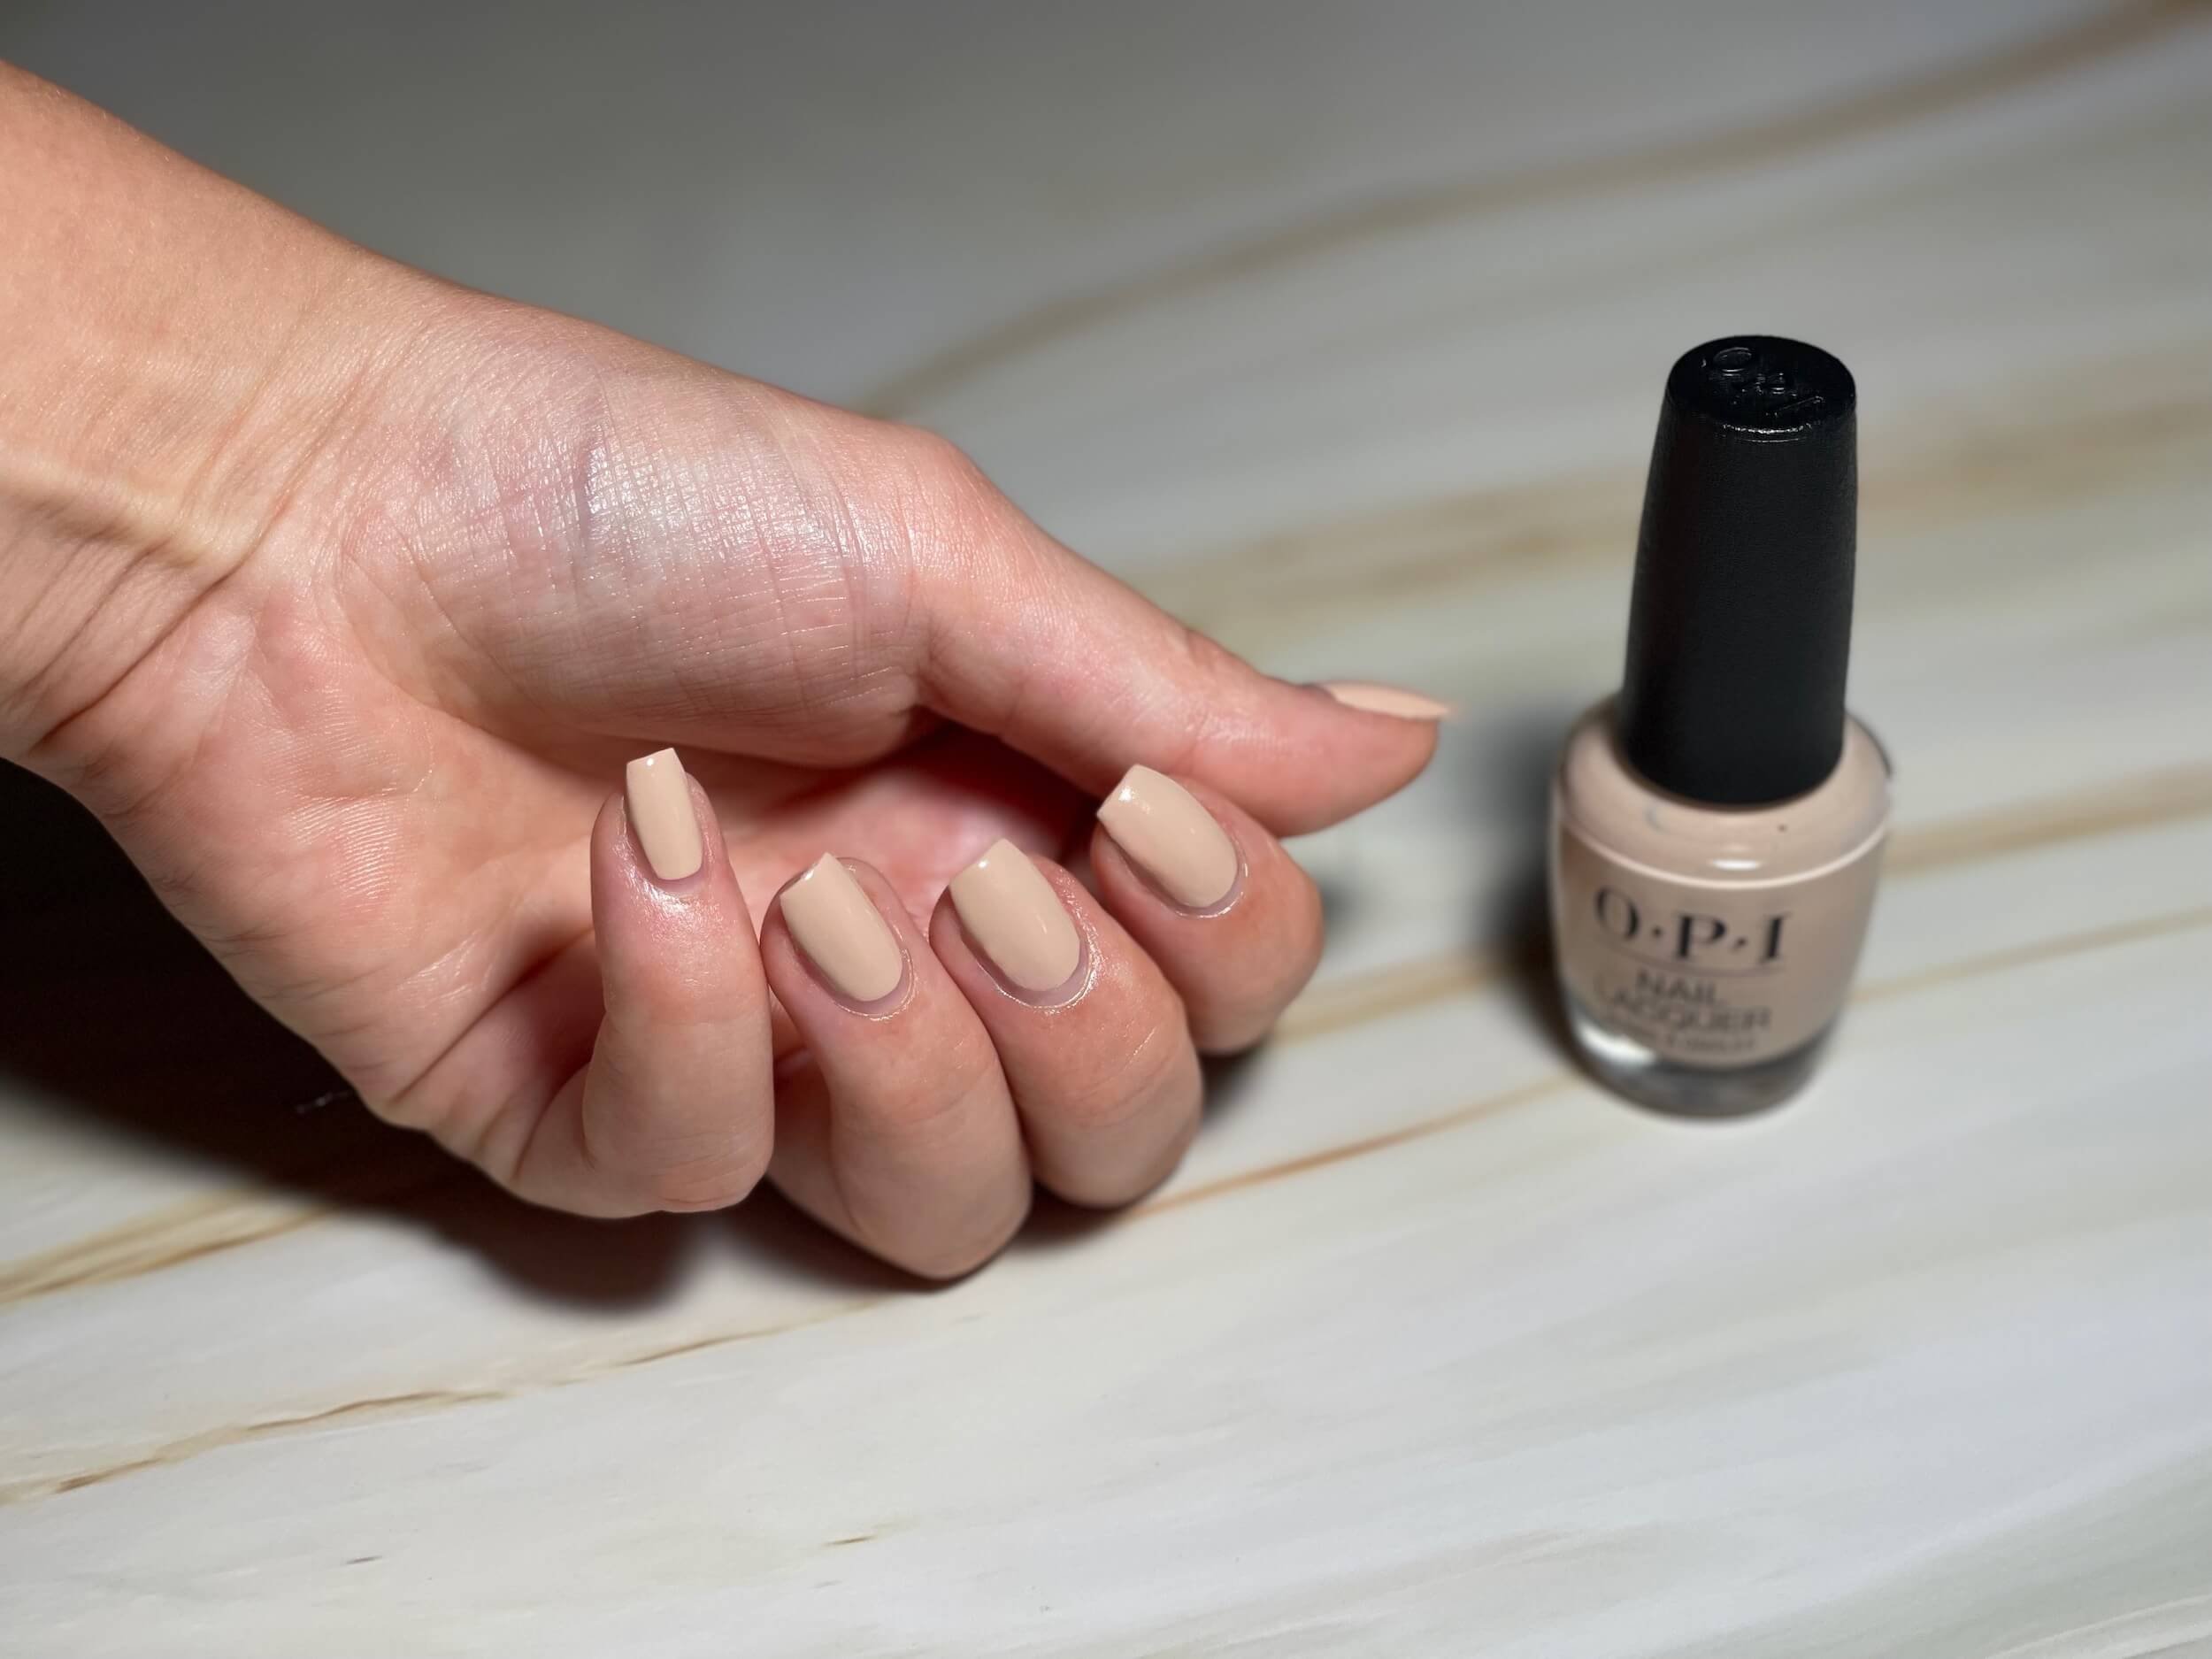 OPI Nail Lacquer, Tiramisu for Two - wide 1